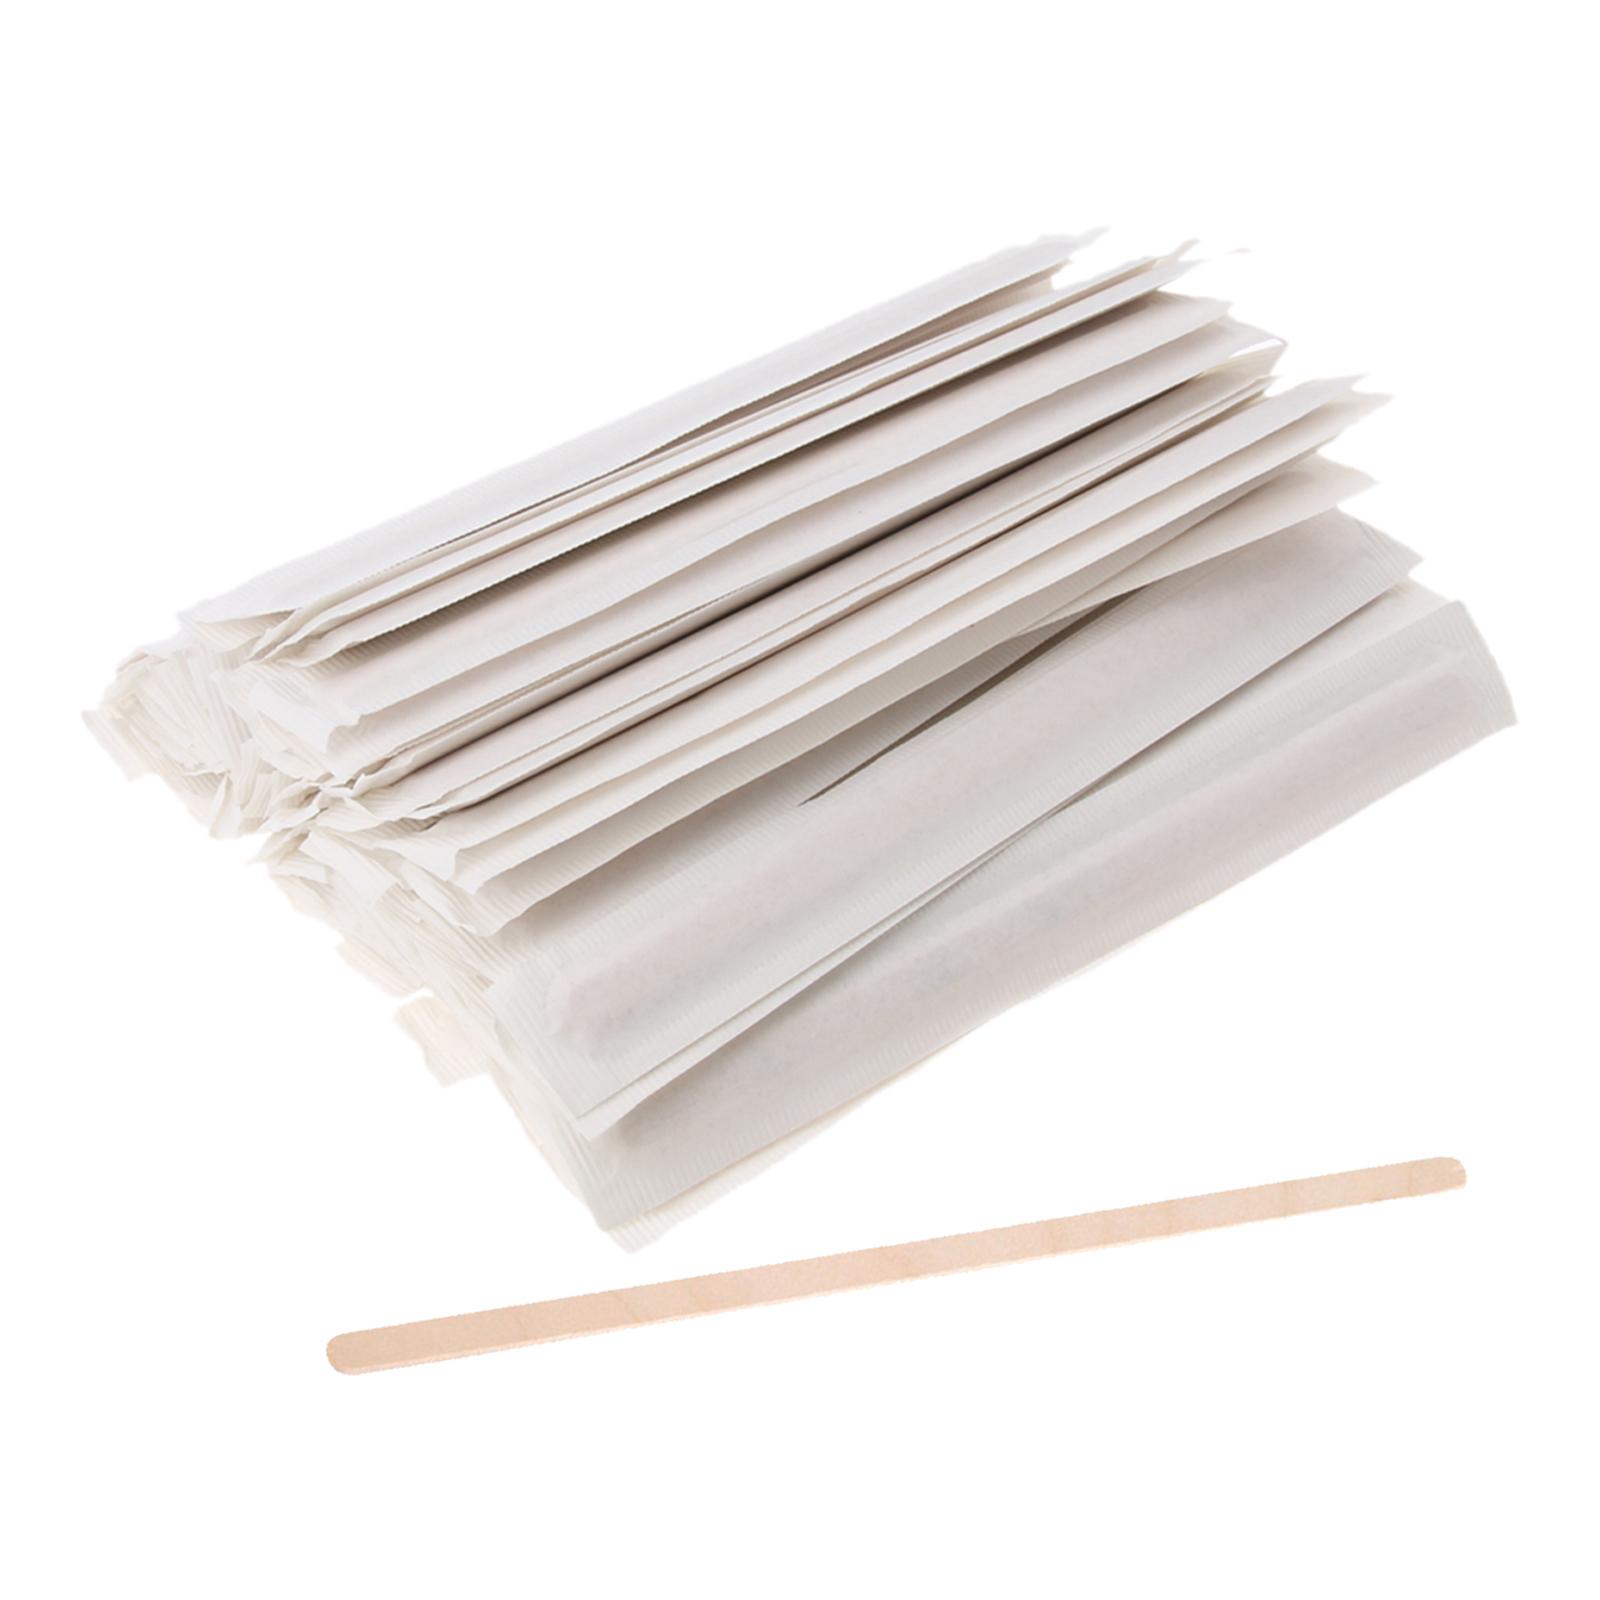 100 Pcs 140mm Disposable Wooden Coffee Stirrer For Hot Cold Drink Beverage 5.5'' of 100% Pure Birch Wood